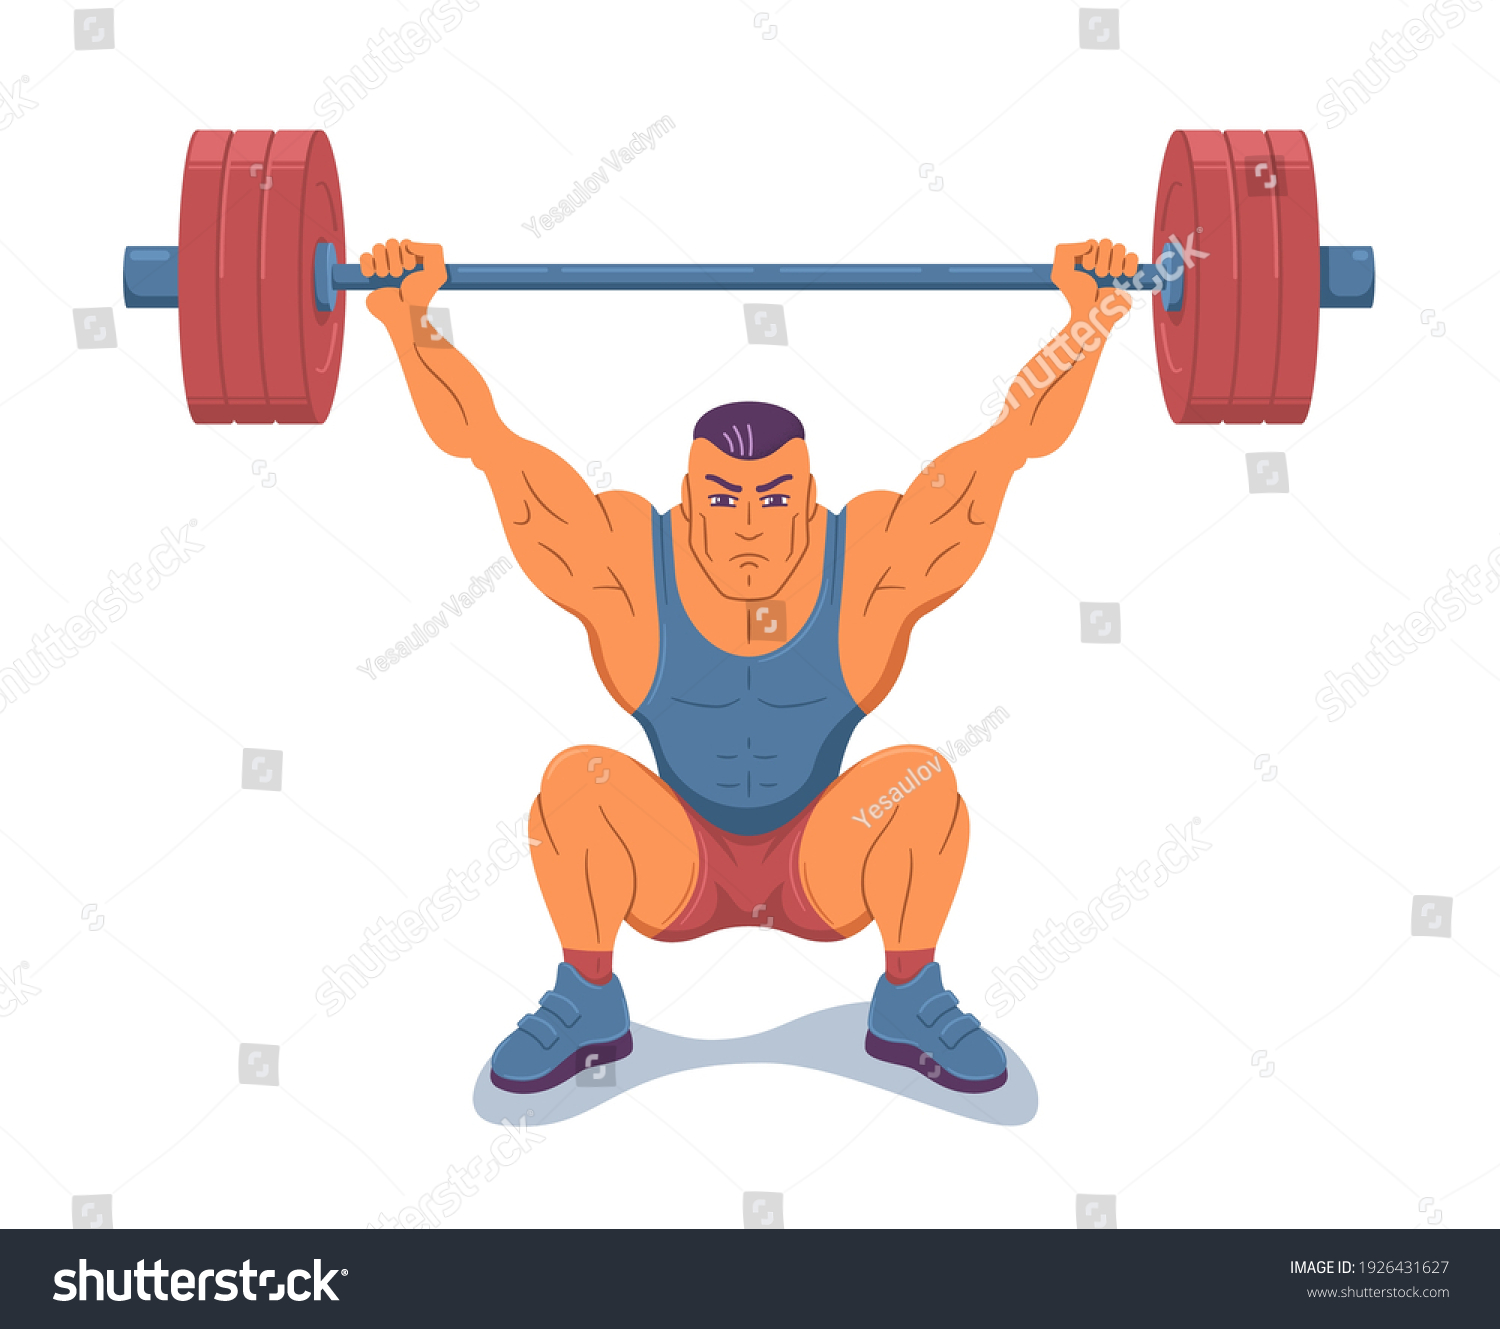 SVG of Strong muscular weightlifter lifting barbell. Illustration of weightlifting snatch execution. On white background svg